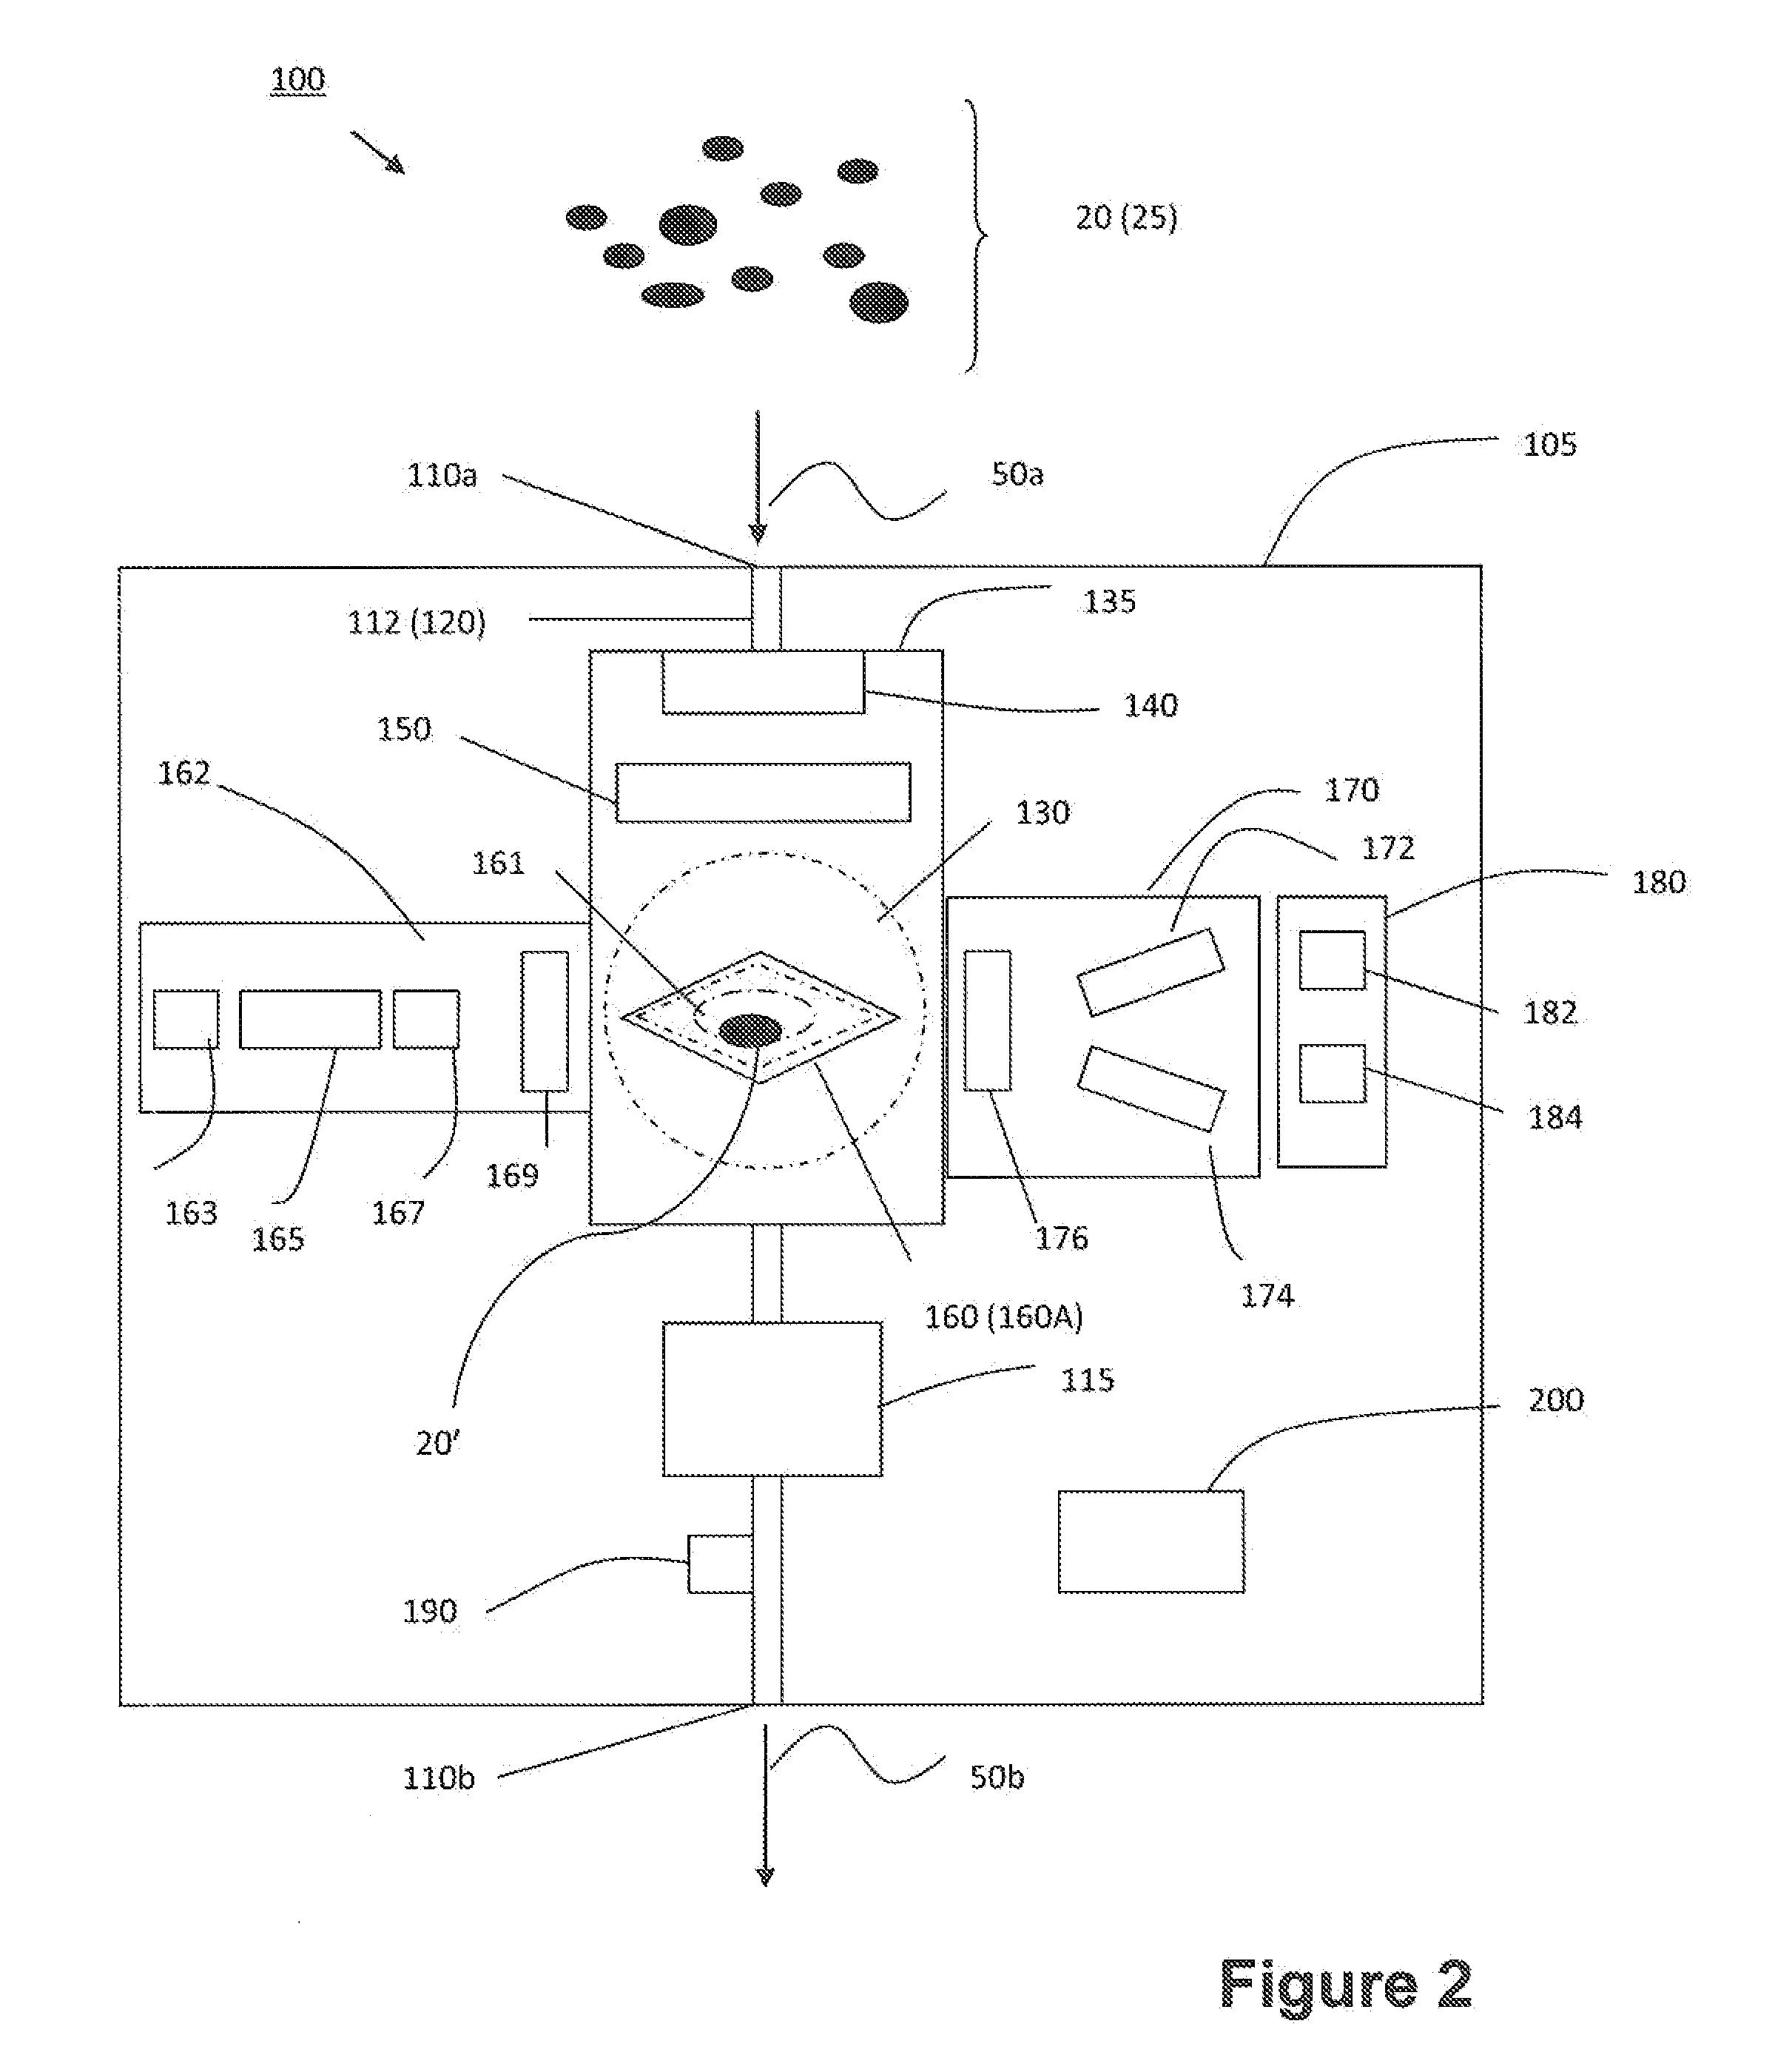 Systems and methods for individually trapping particles from air and measuring the optical spectra or other properties of individual trapped particles